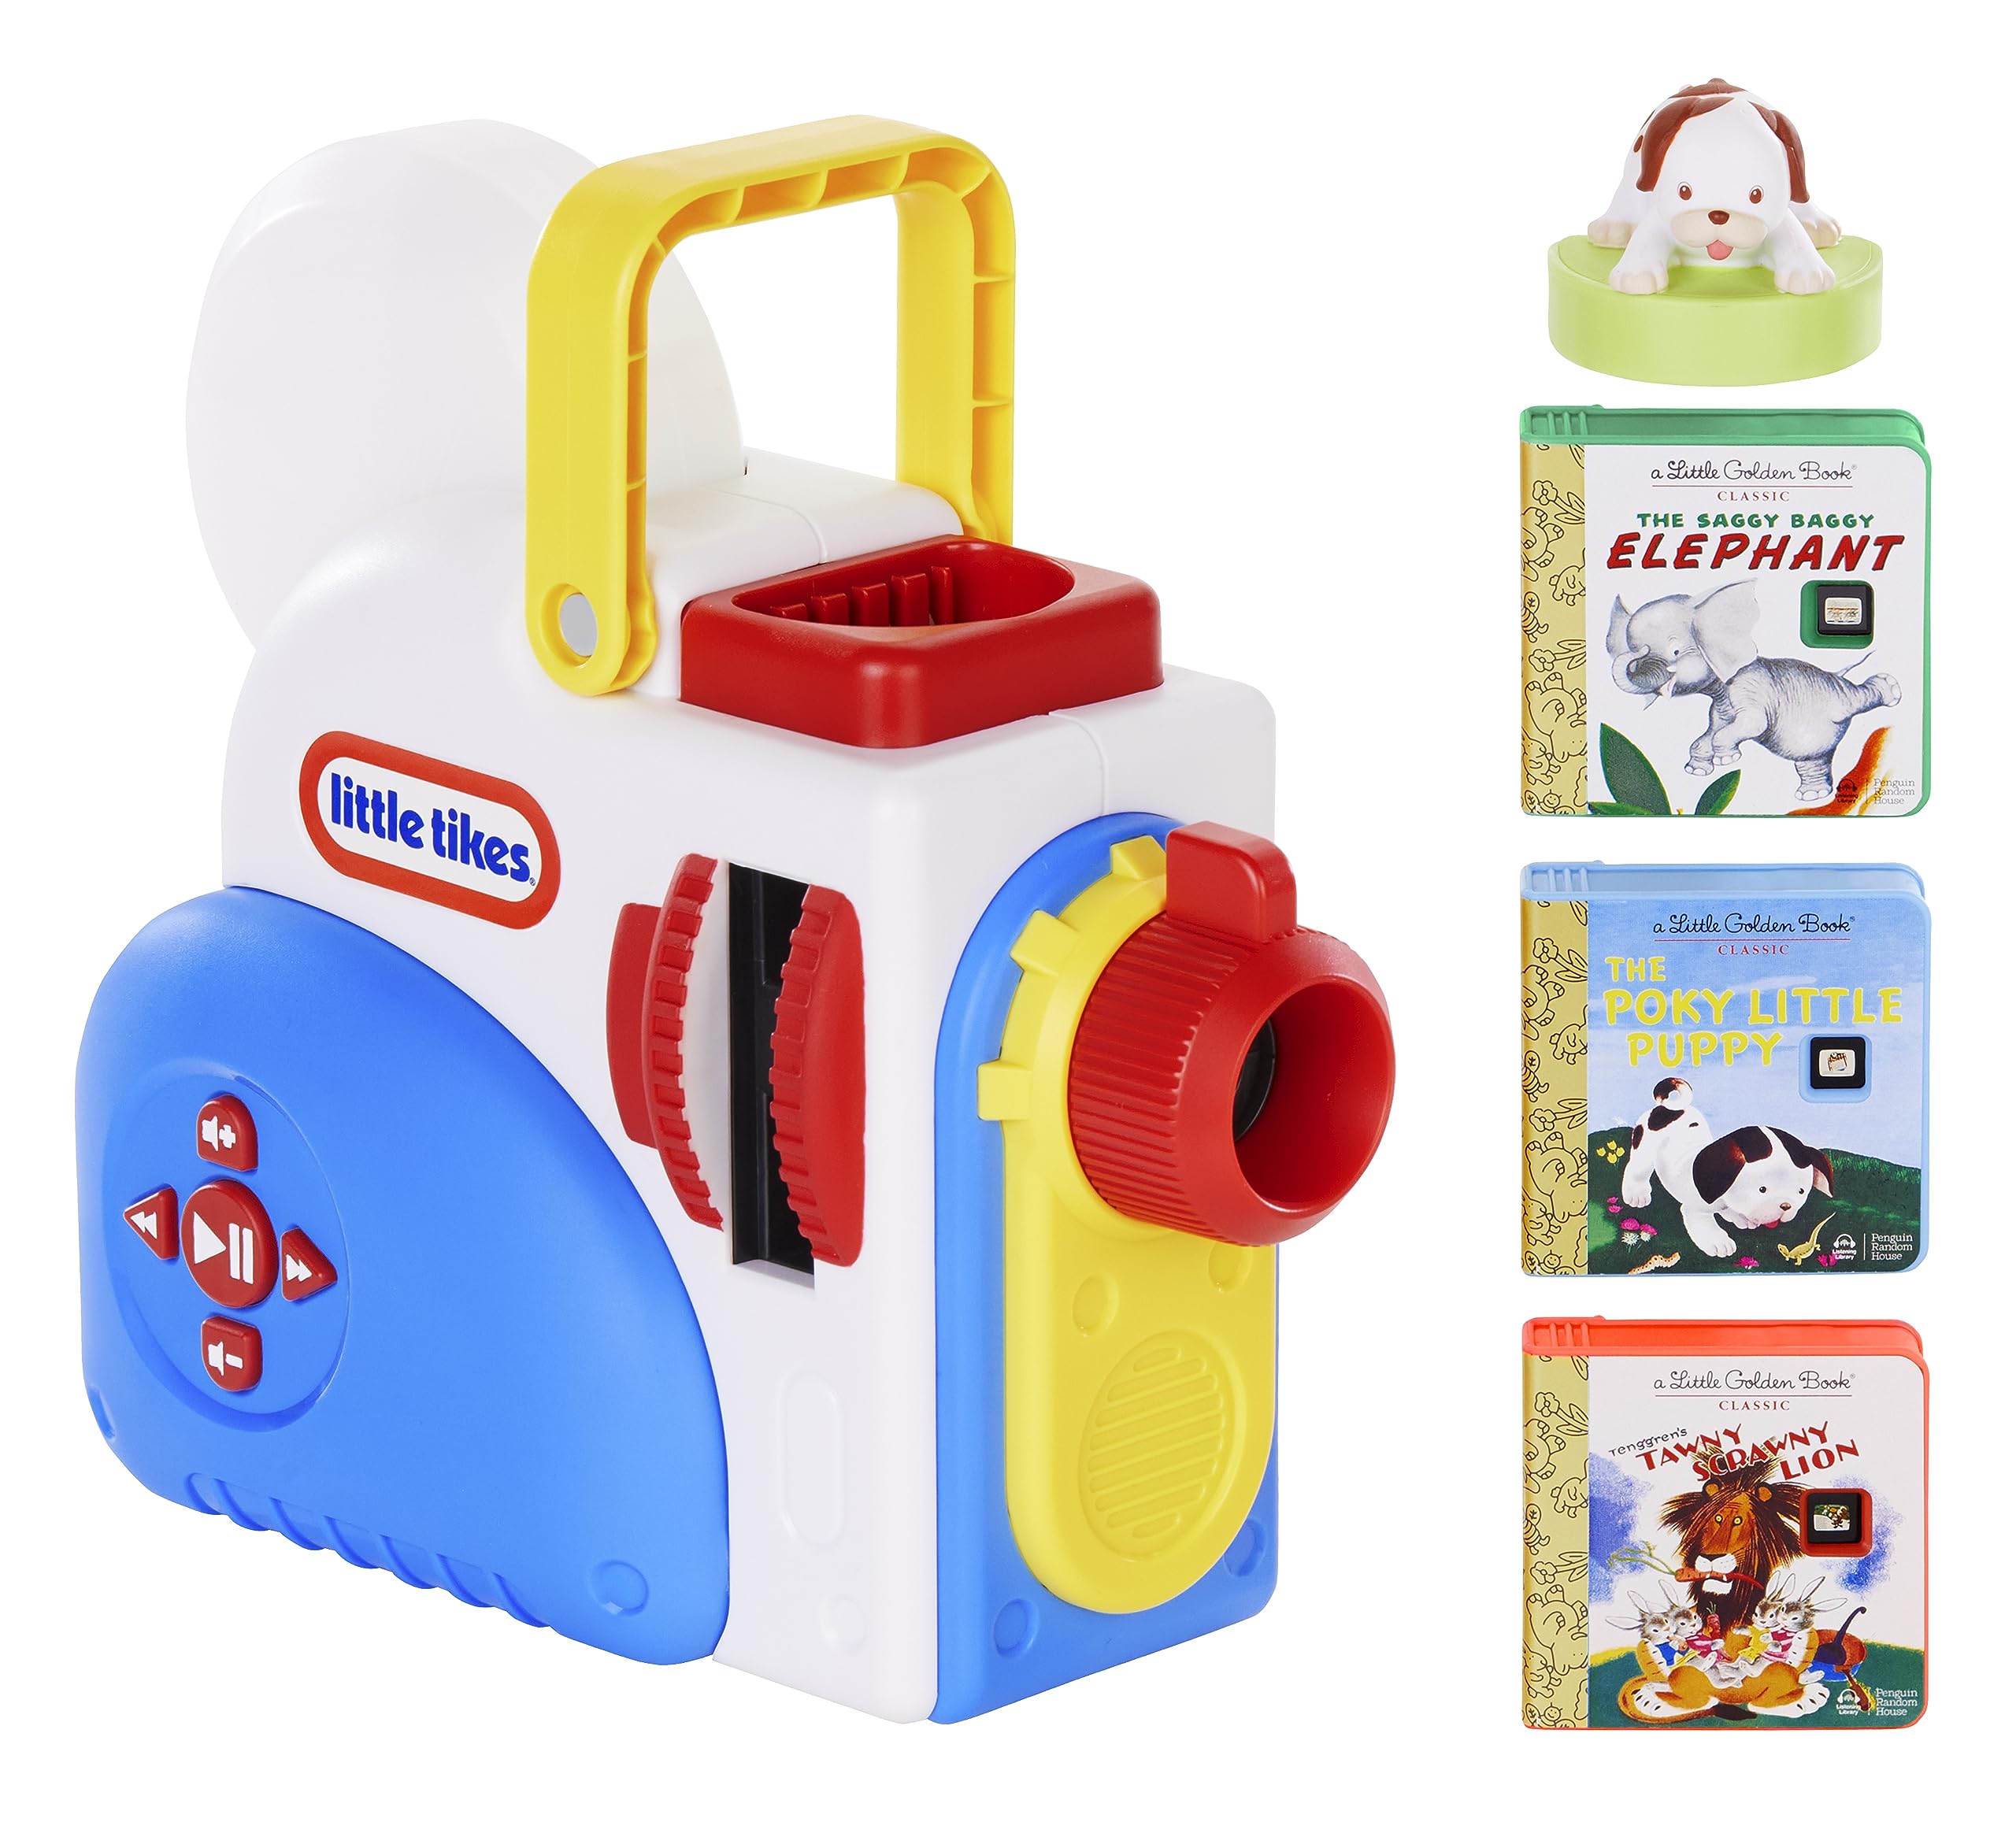 Little Tikes Story Dream Machine Starter Set, Storytime, Books, Little Golden Book, Audio Play, The Poky Little Puppy Character, Nightlight, Gift and Toy for Toddlers and Kids Girls Boys Ages 3+ years